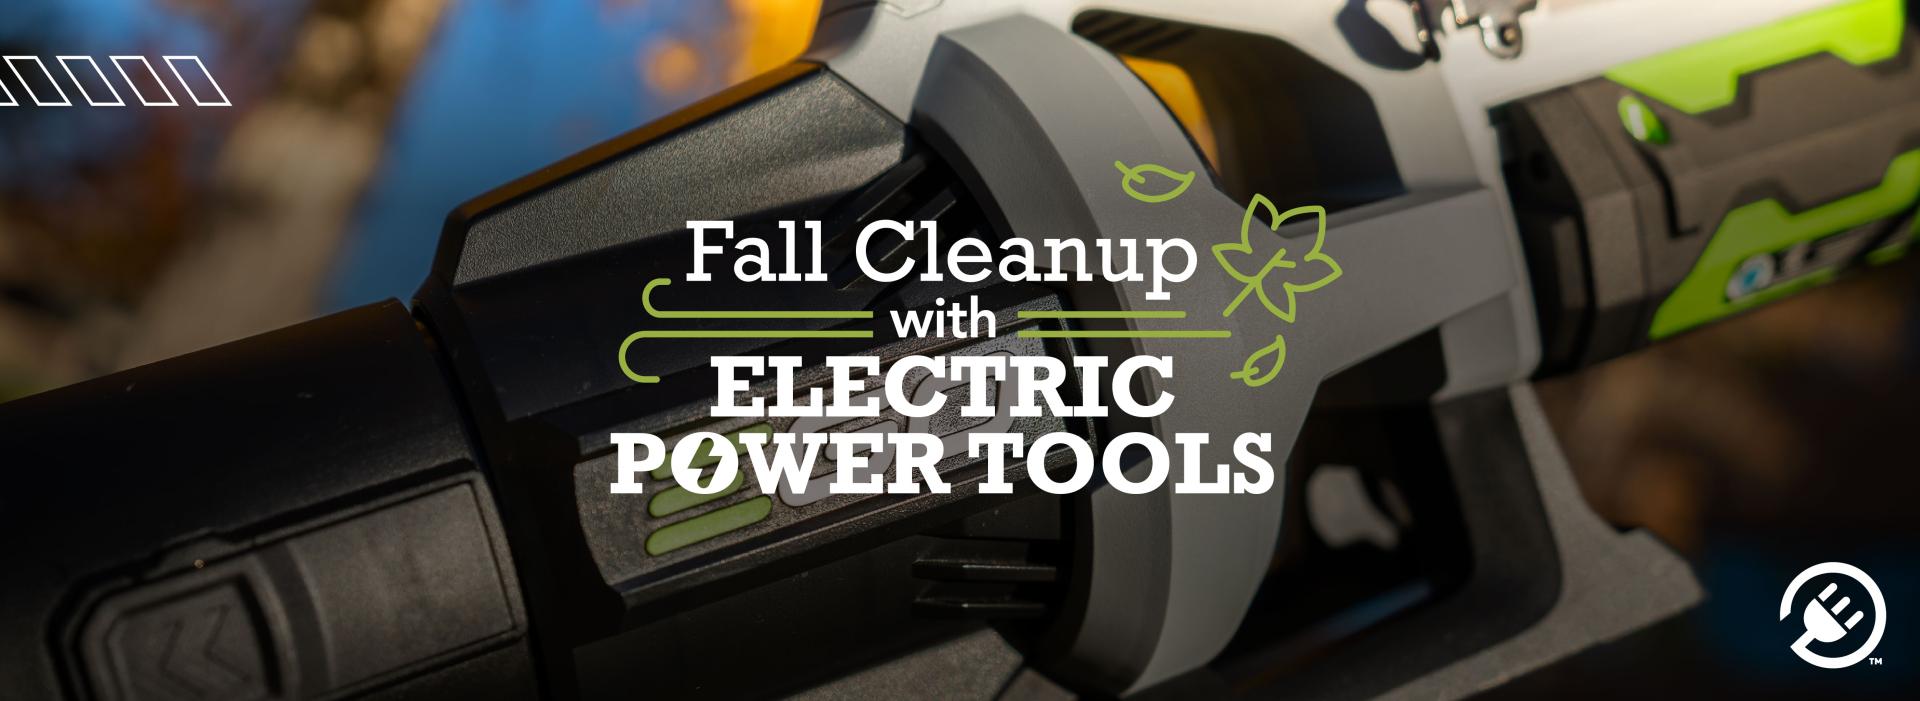 Fall Cleanup Benefits With Electric Power Tools